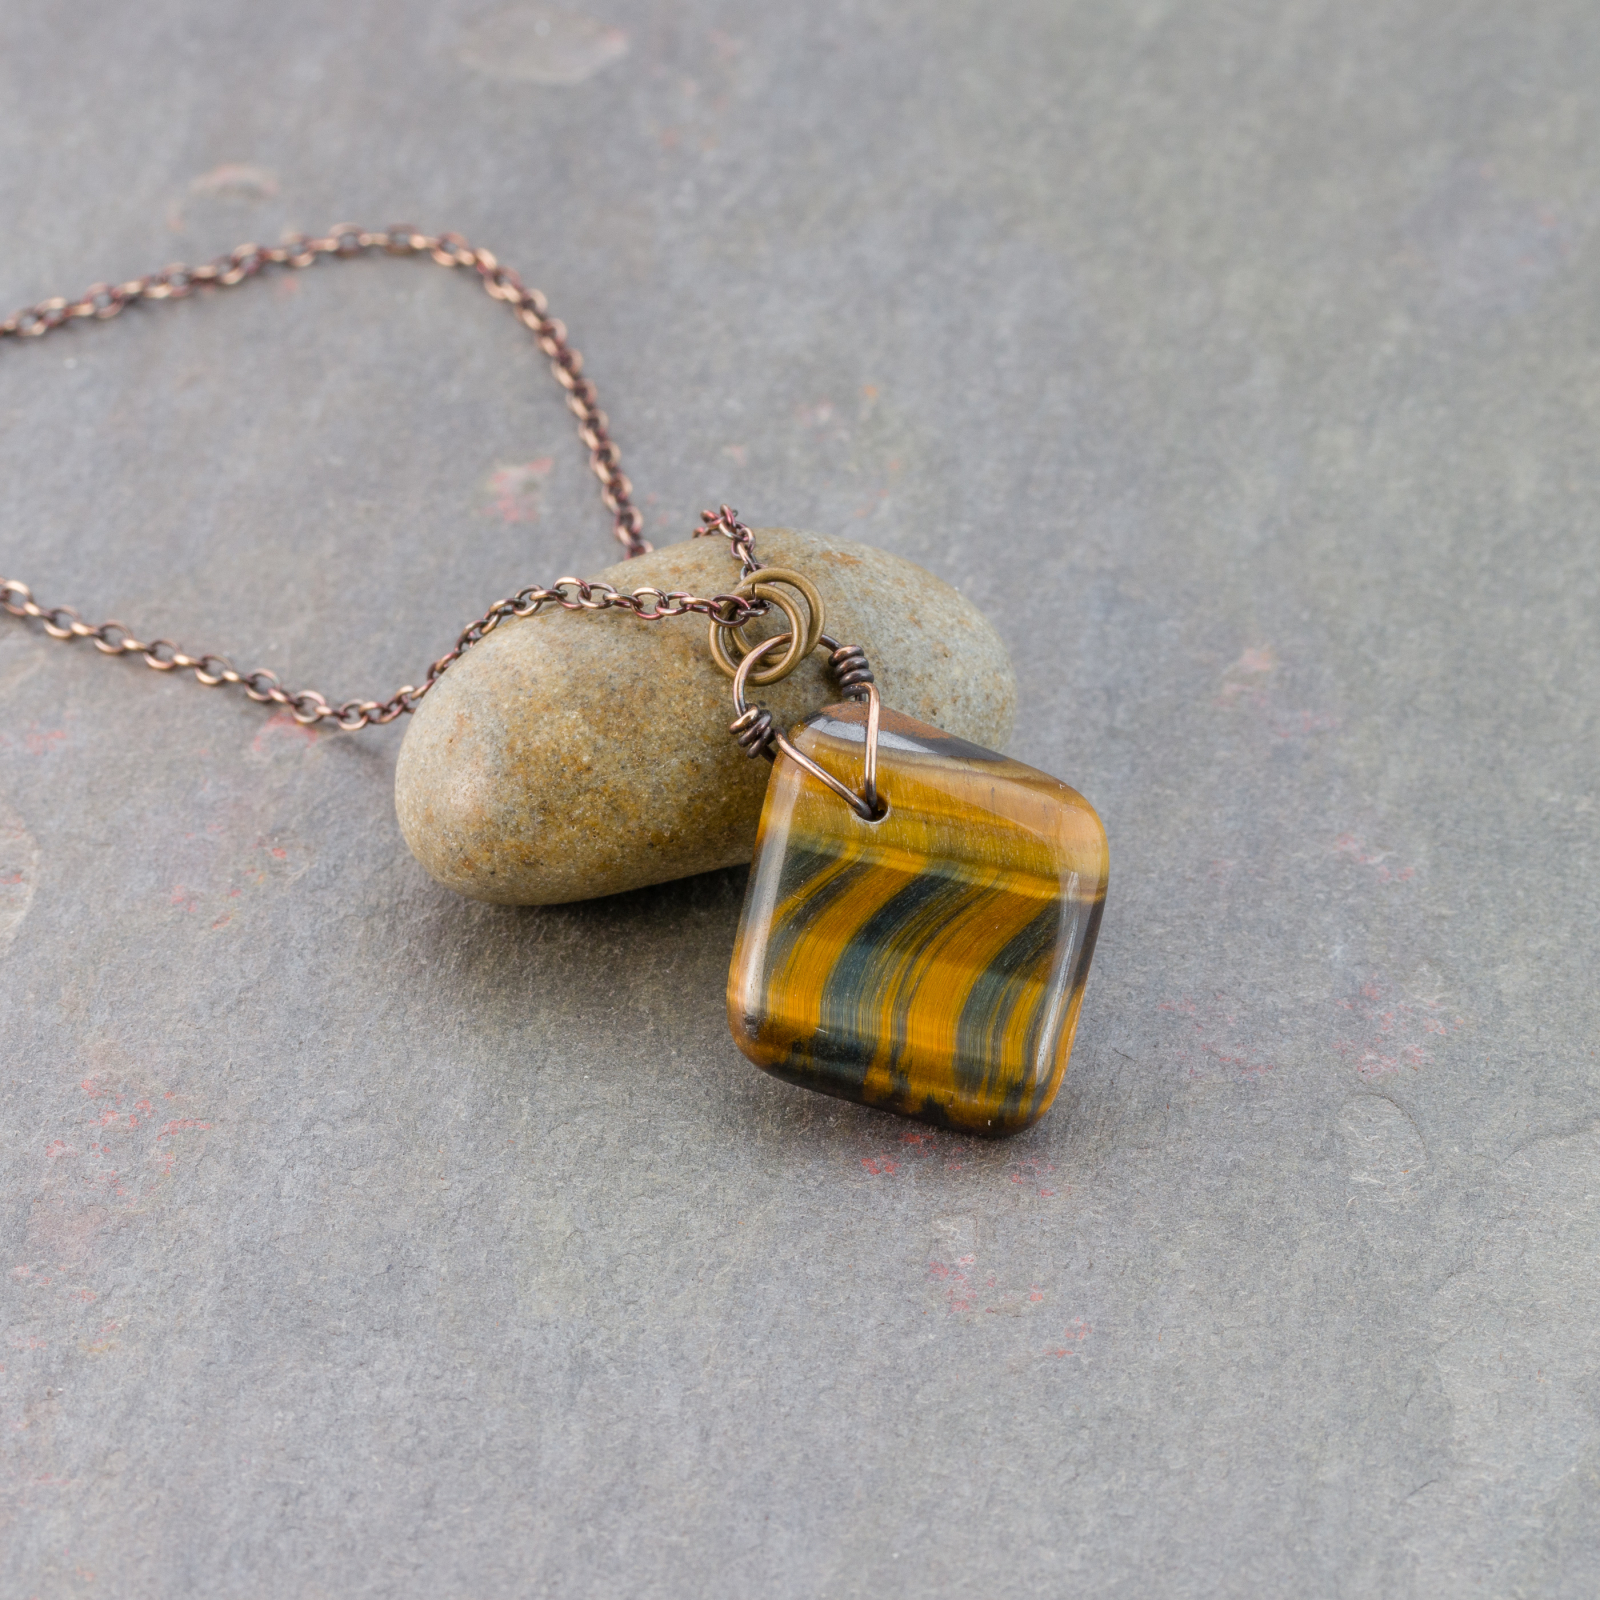 Tiger Eye Necklace and Earring Set Tiger Eye Jewelry Tiger Eye Necklace Tiger Eye Pendant Tigers Eye Necklace Tigers Eye Pendant